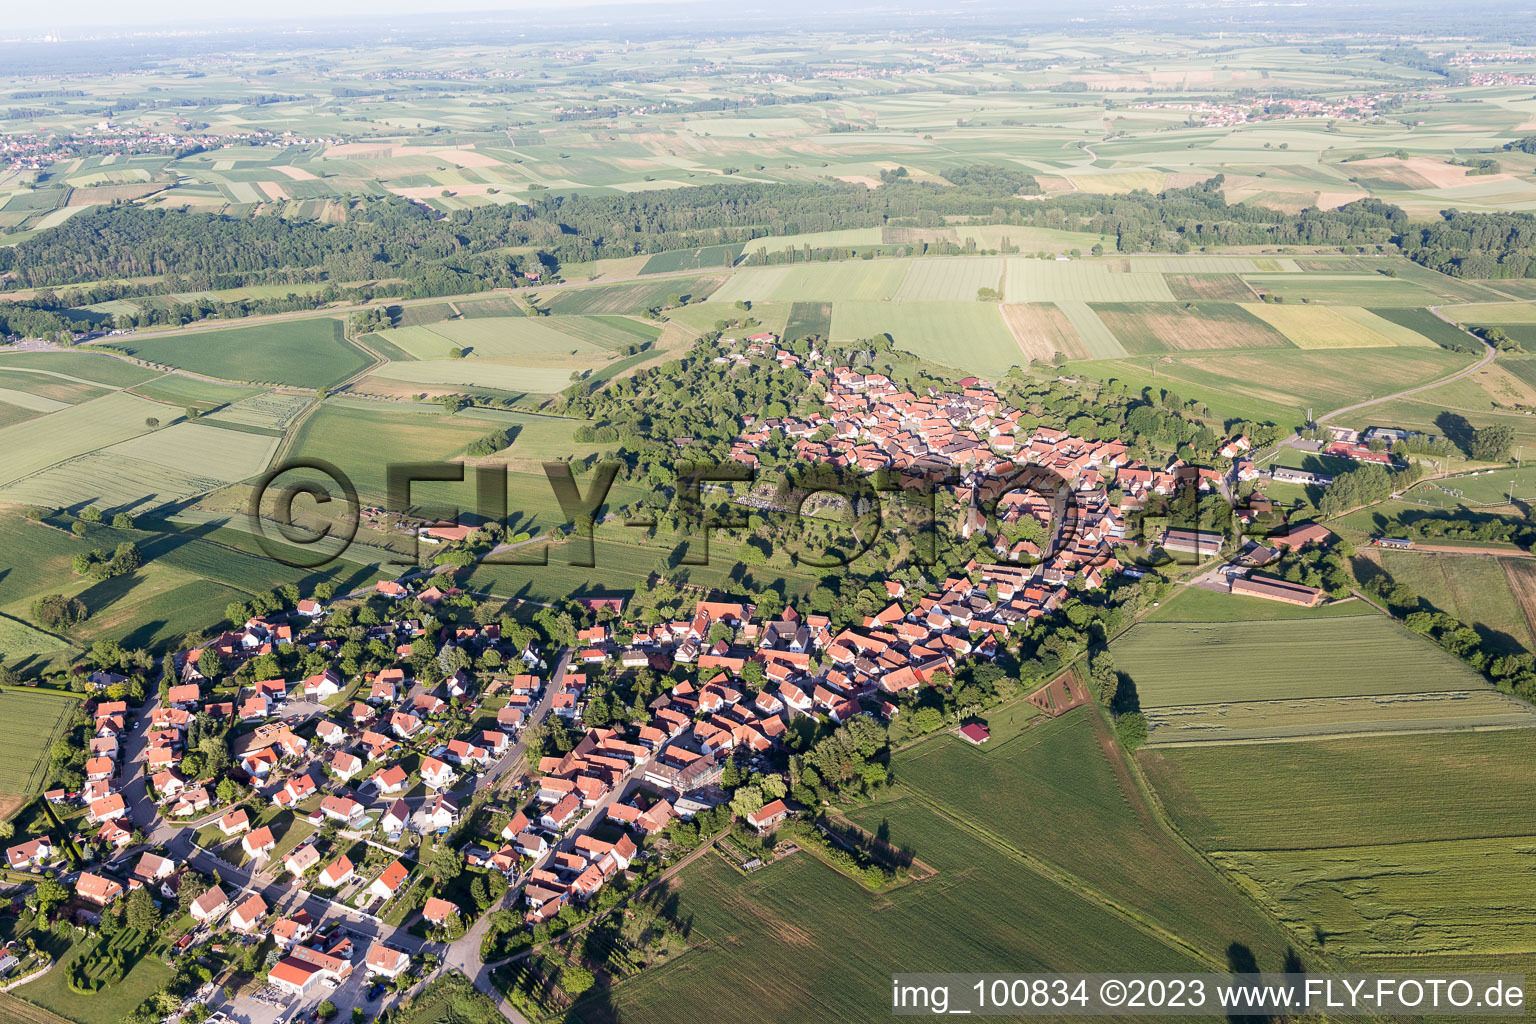 Hunspach in the state Bas-Rhin, France seen from above